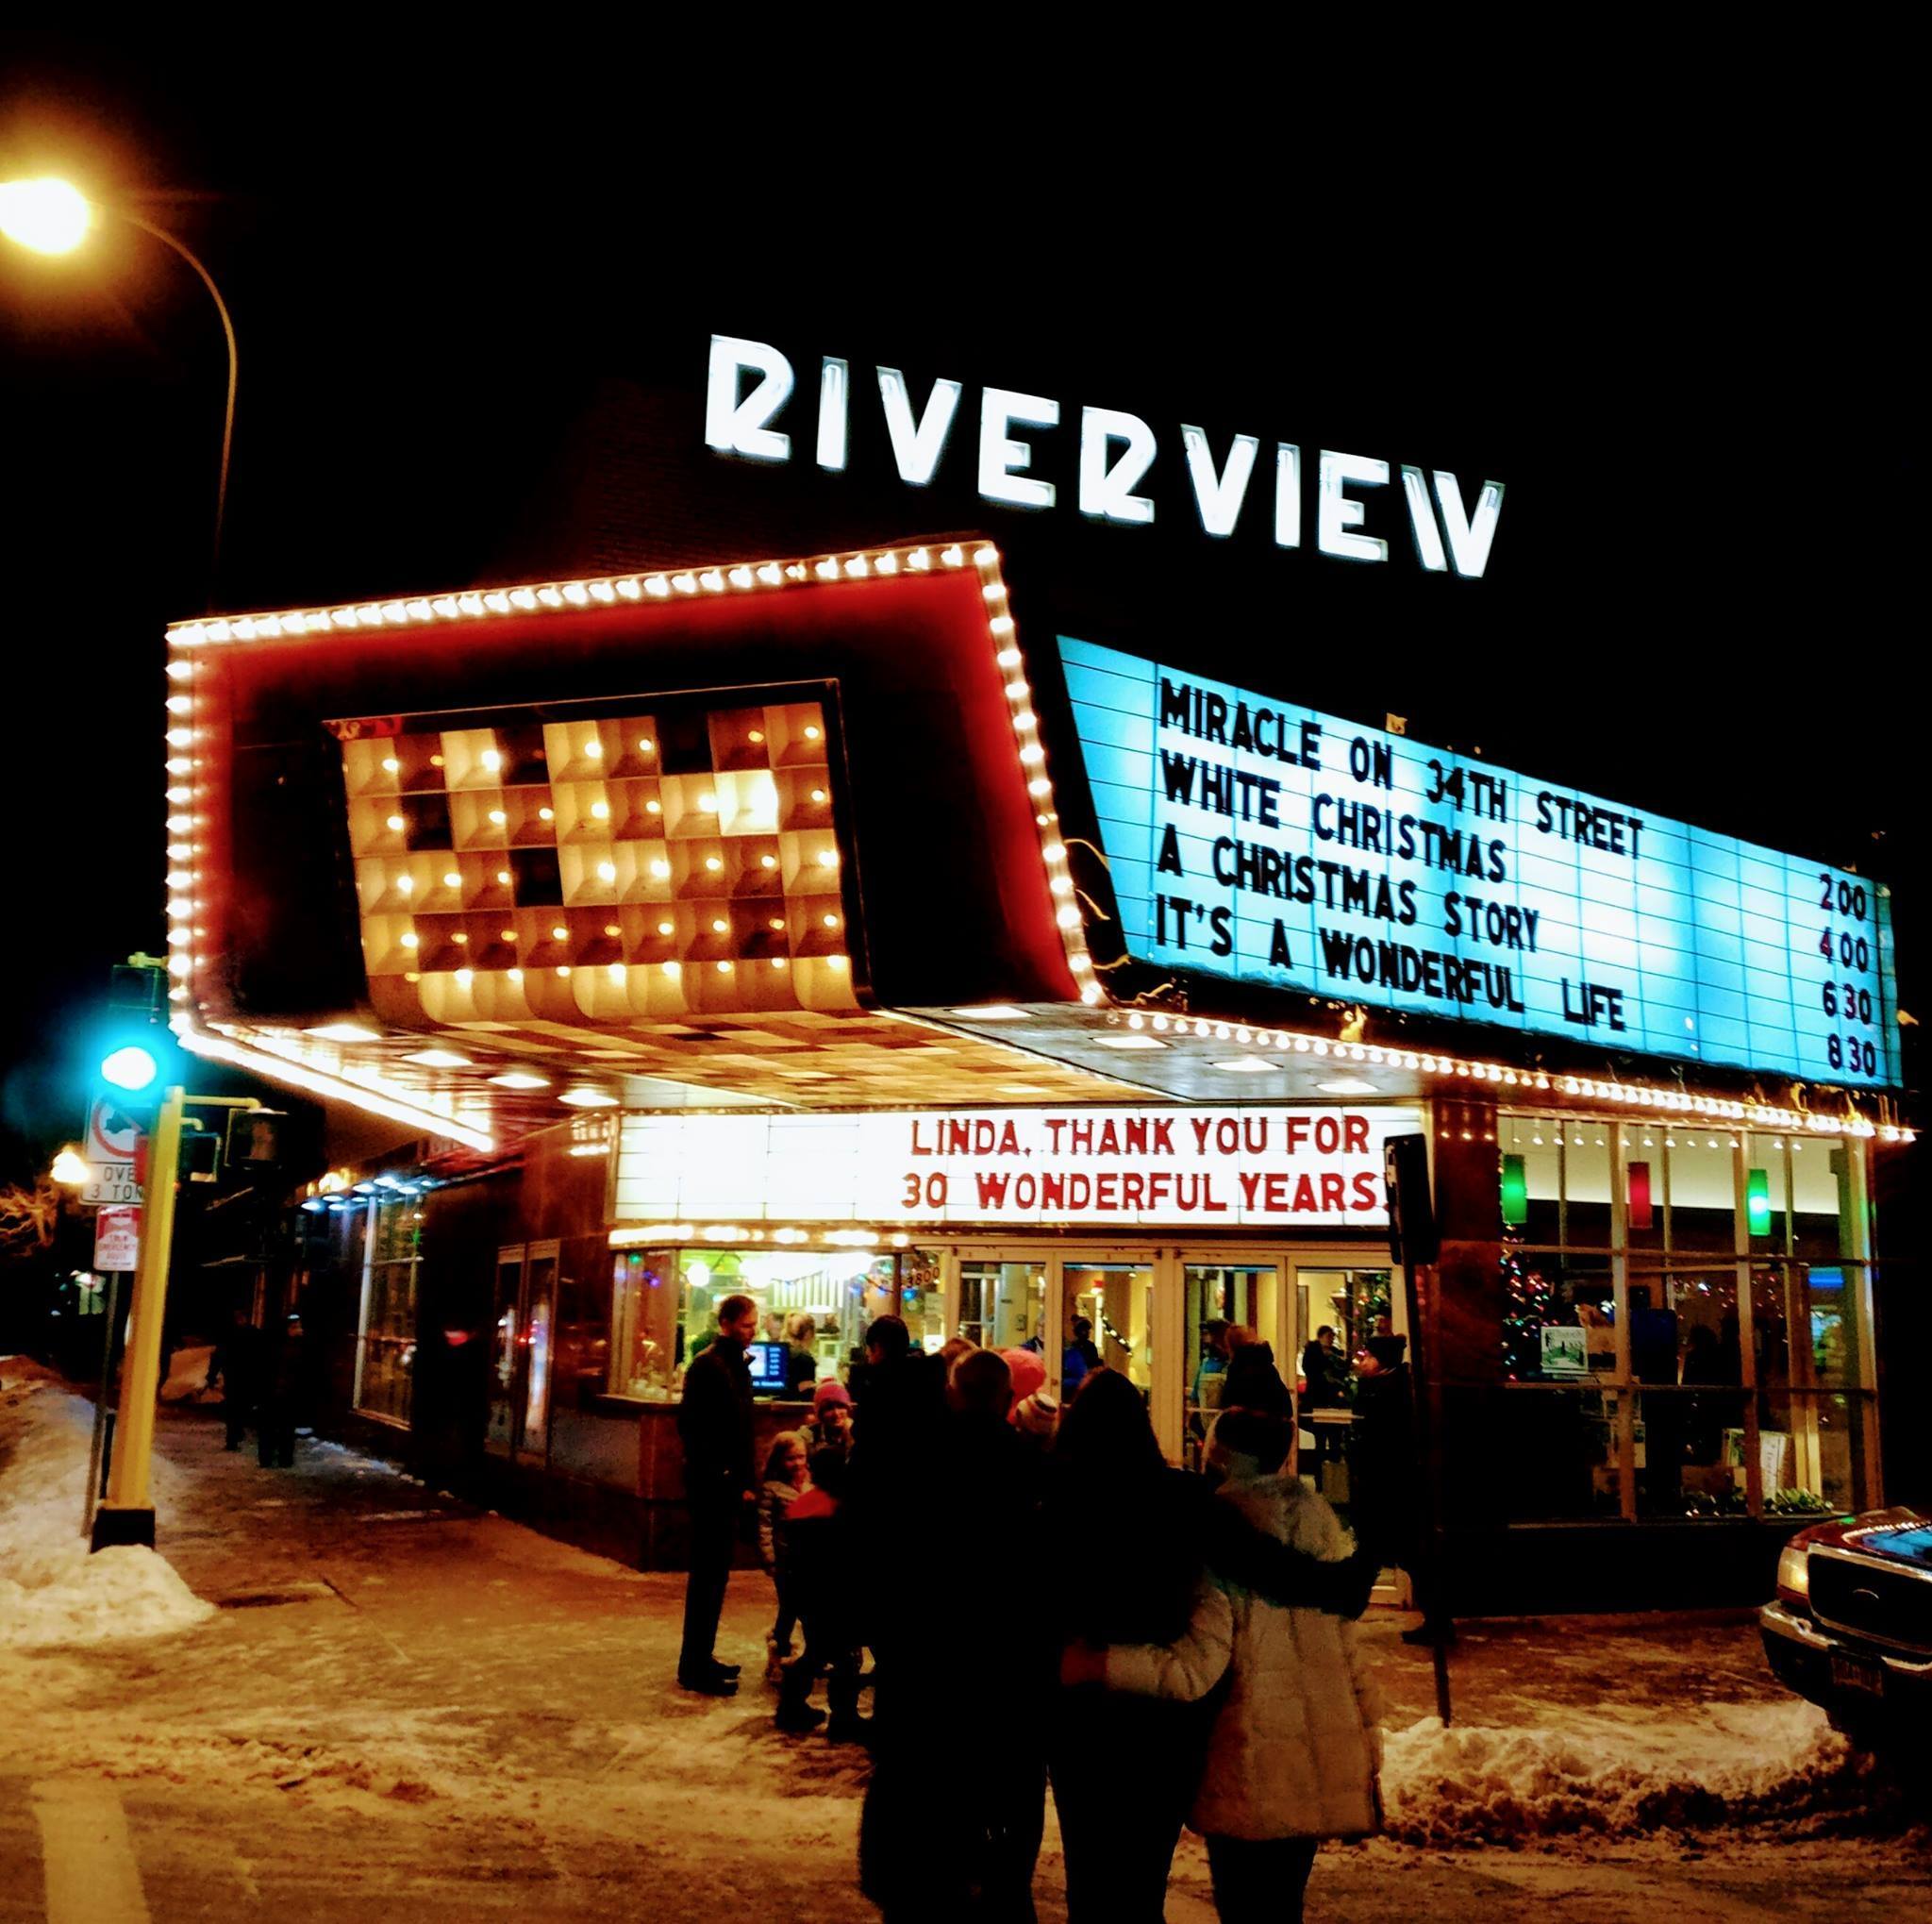 Riverview Christmas Movies image of outside of theatre and marquee.